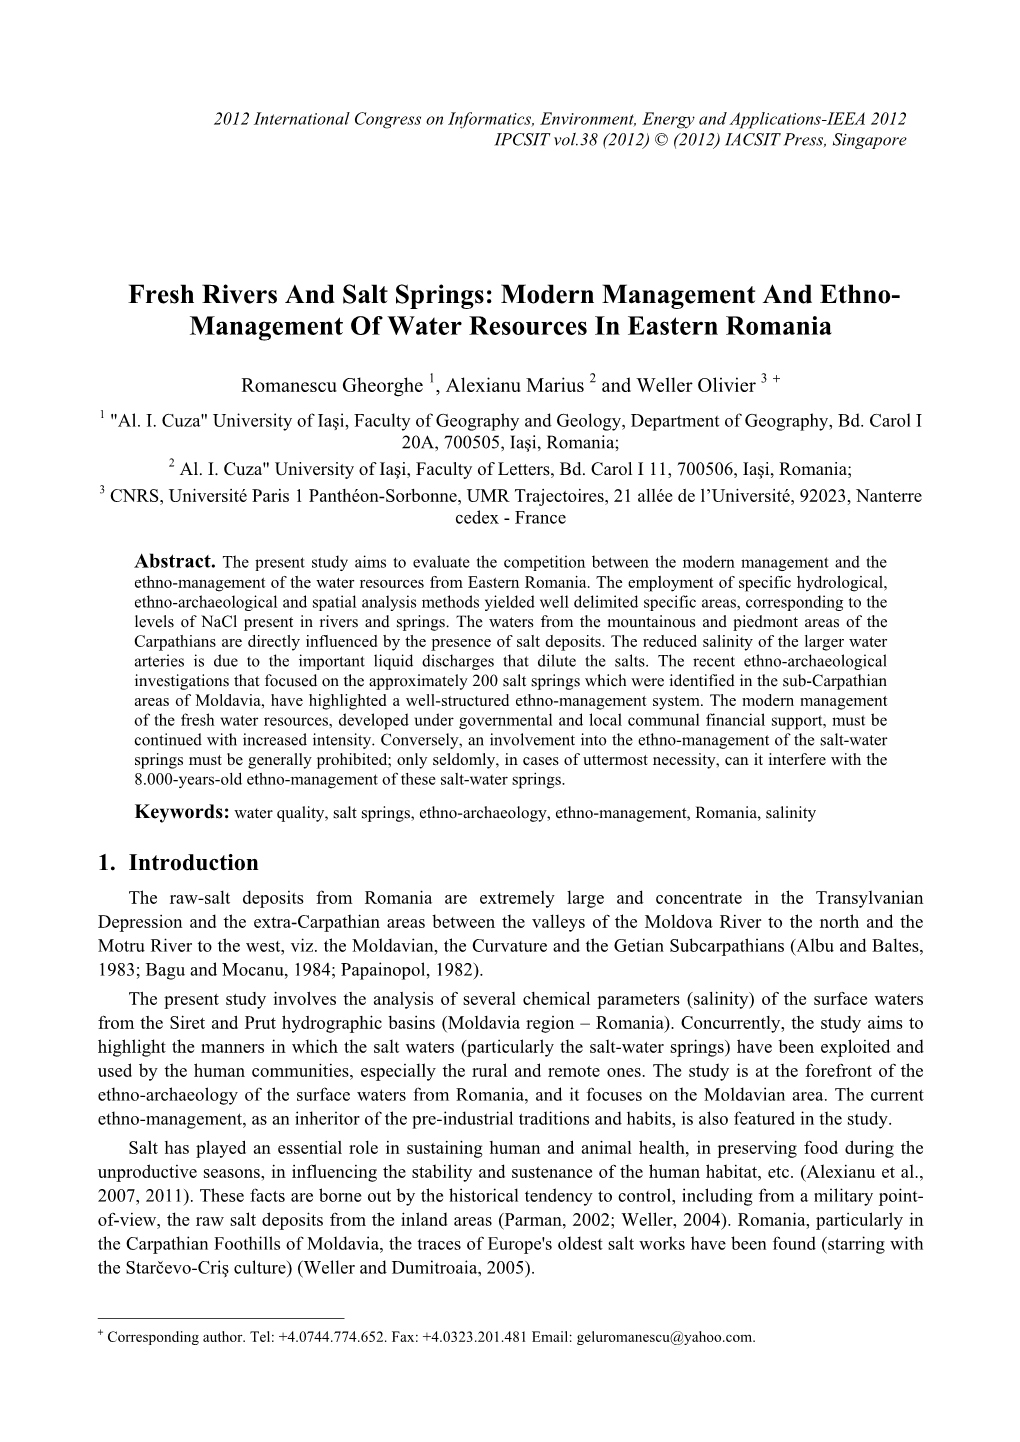 Fresh Rivers and Salt Springs: Modern Management and Ethno- Management of Water Resources in Eastern Romania